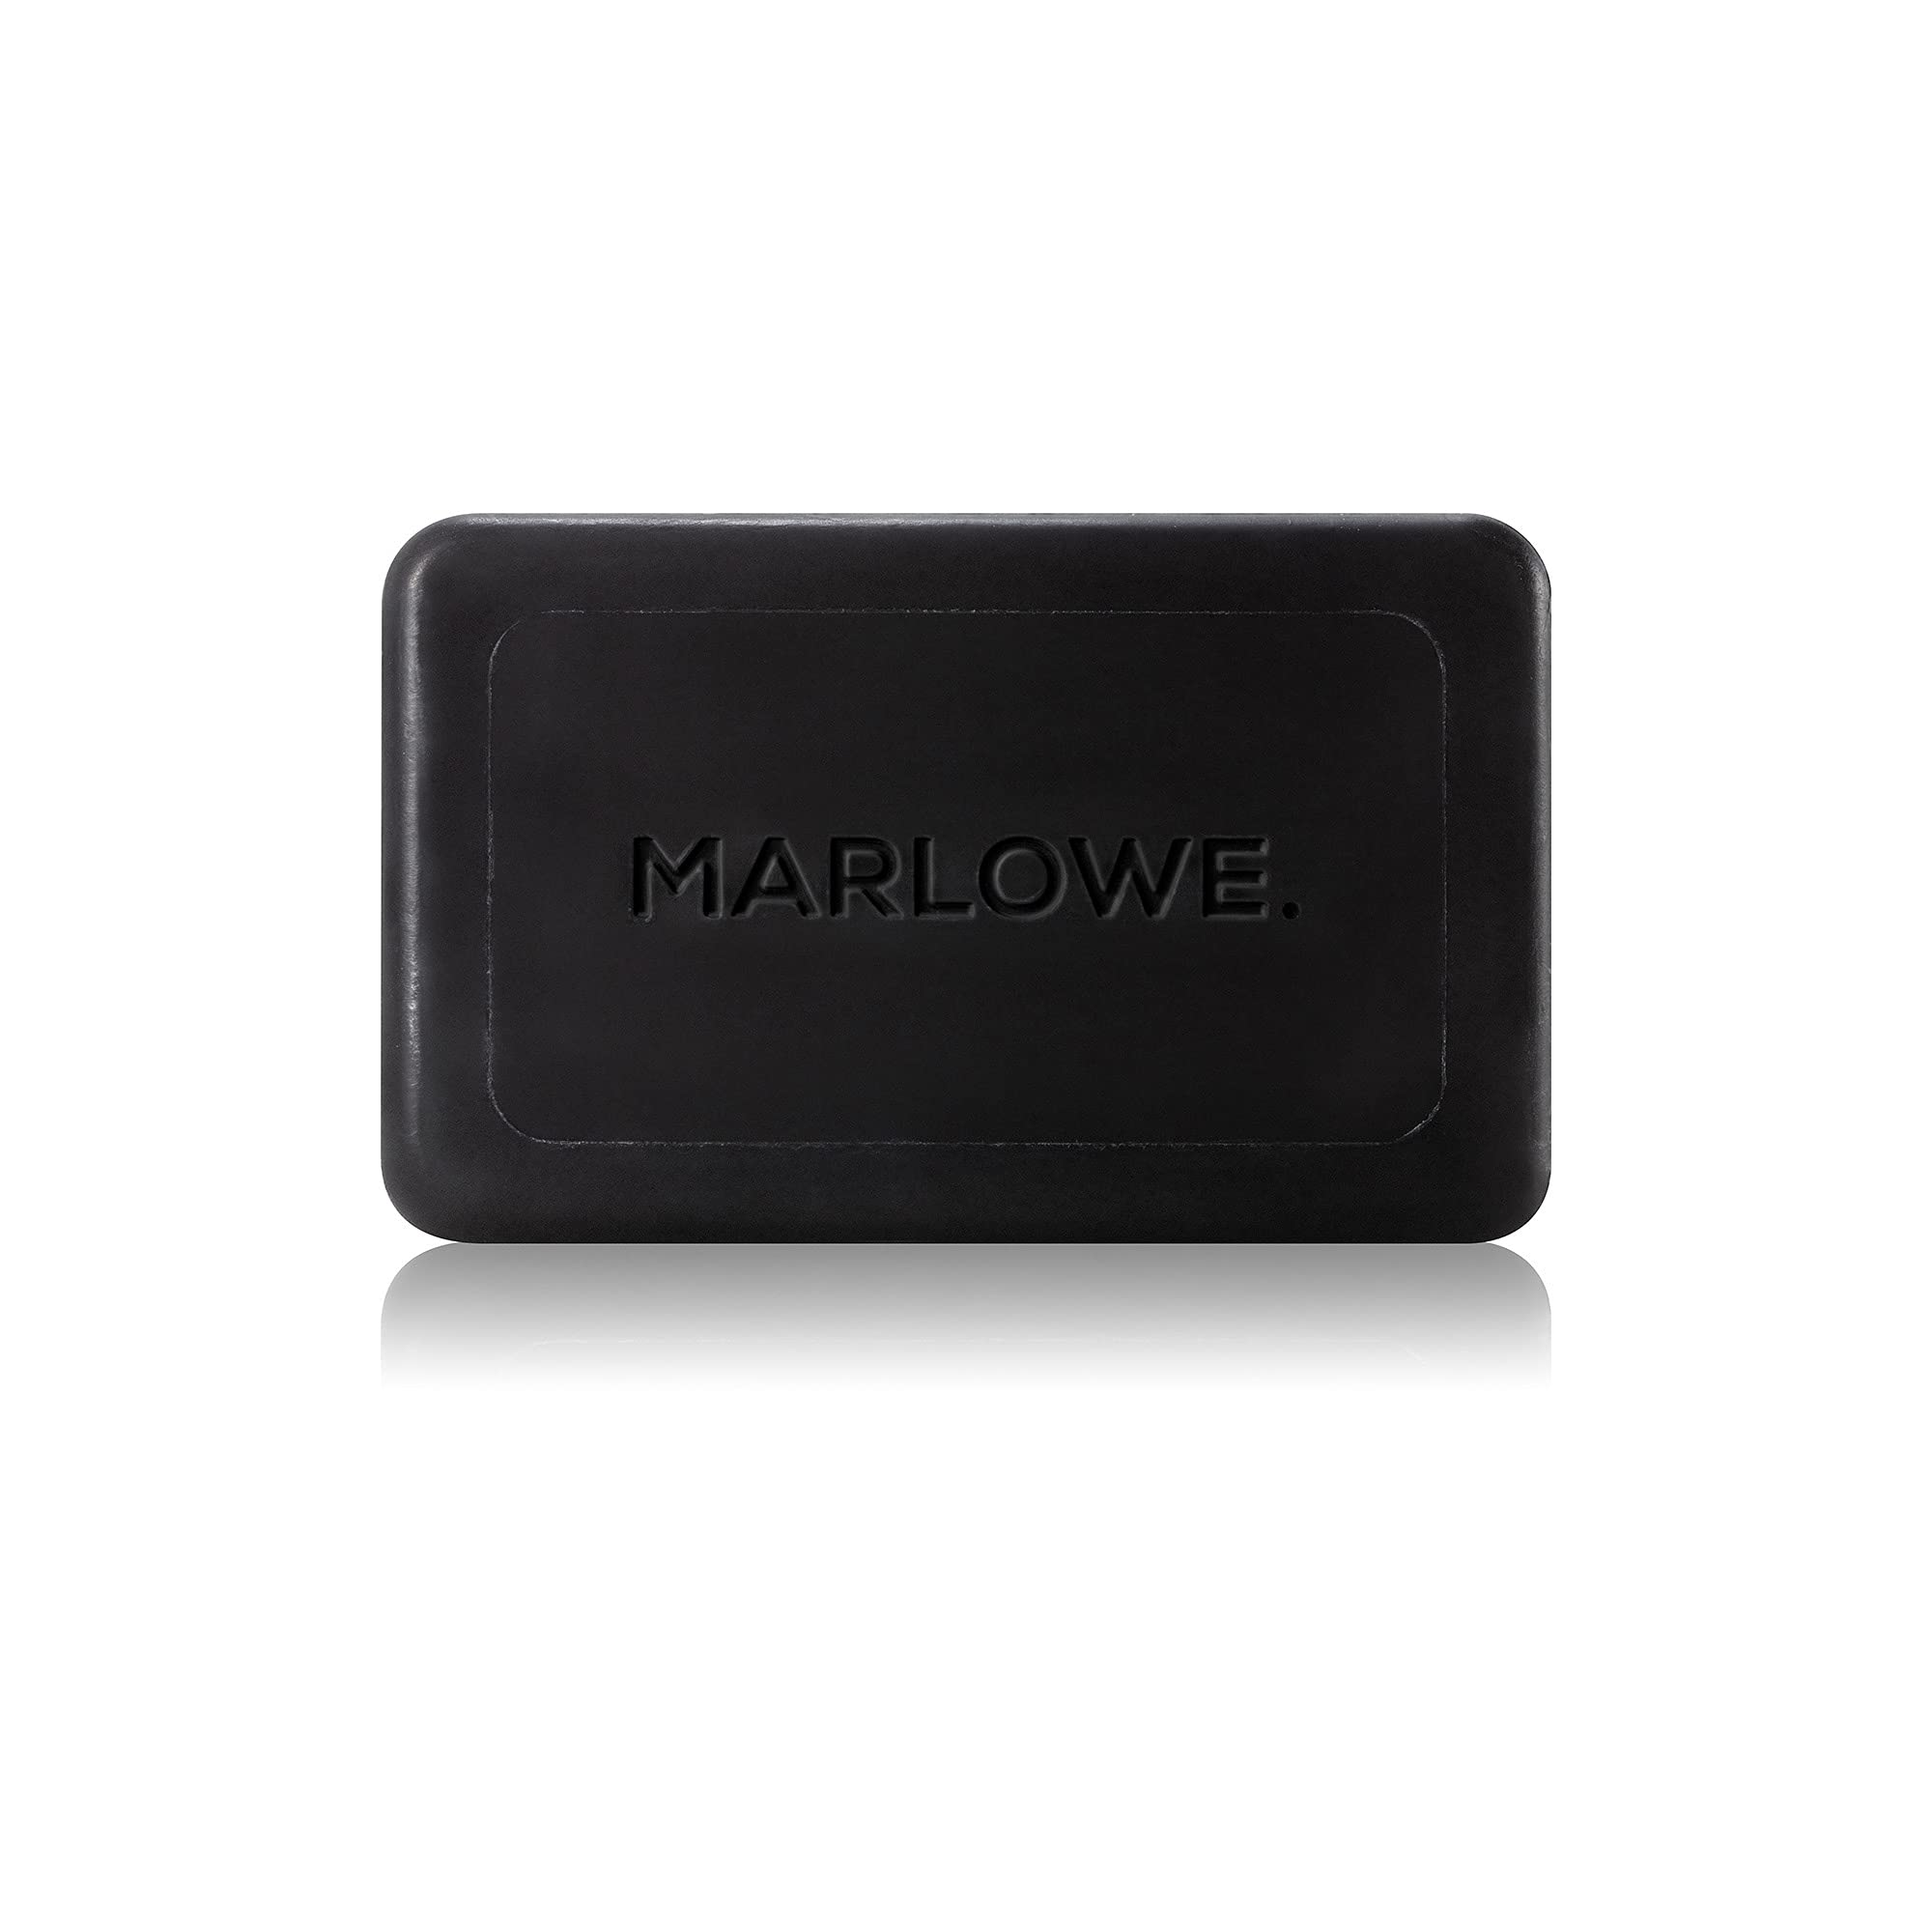 Book Cover MARLOWE. Charcoal Face & Body Soap Bar No. 106 (7oz) | Best Cleansing & Detoxifying Bar for Men | Includes Natural Extracts, Shea Butter & Willow Bark | Amazing Scent 7 Ounce (Pack of 1)